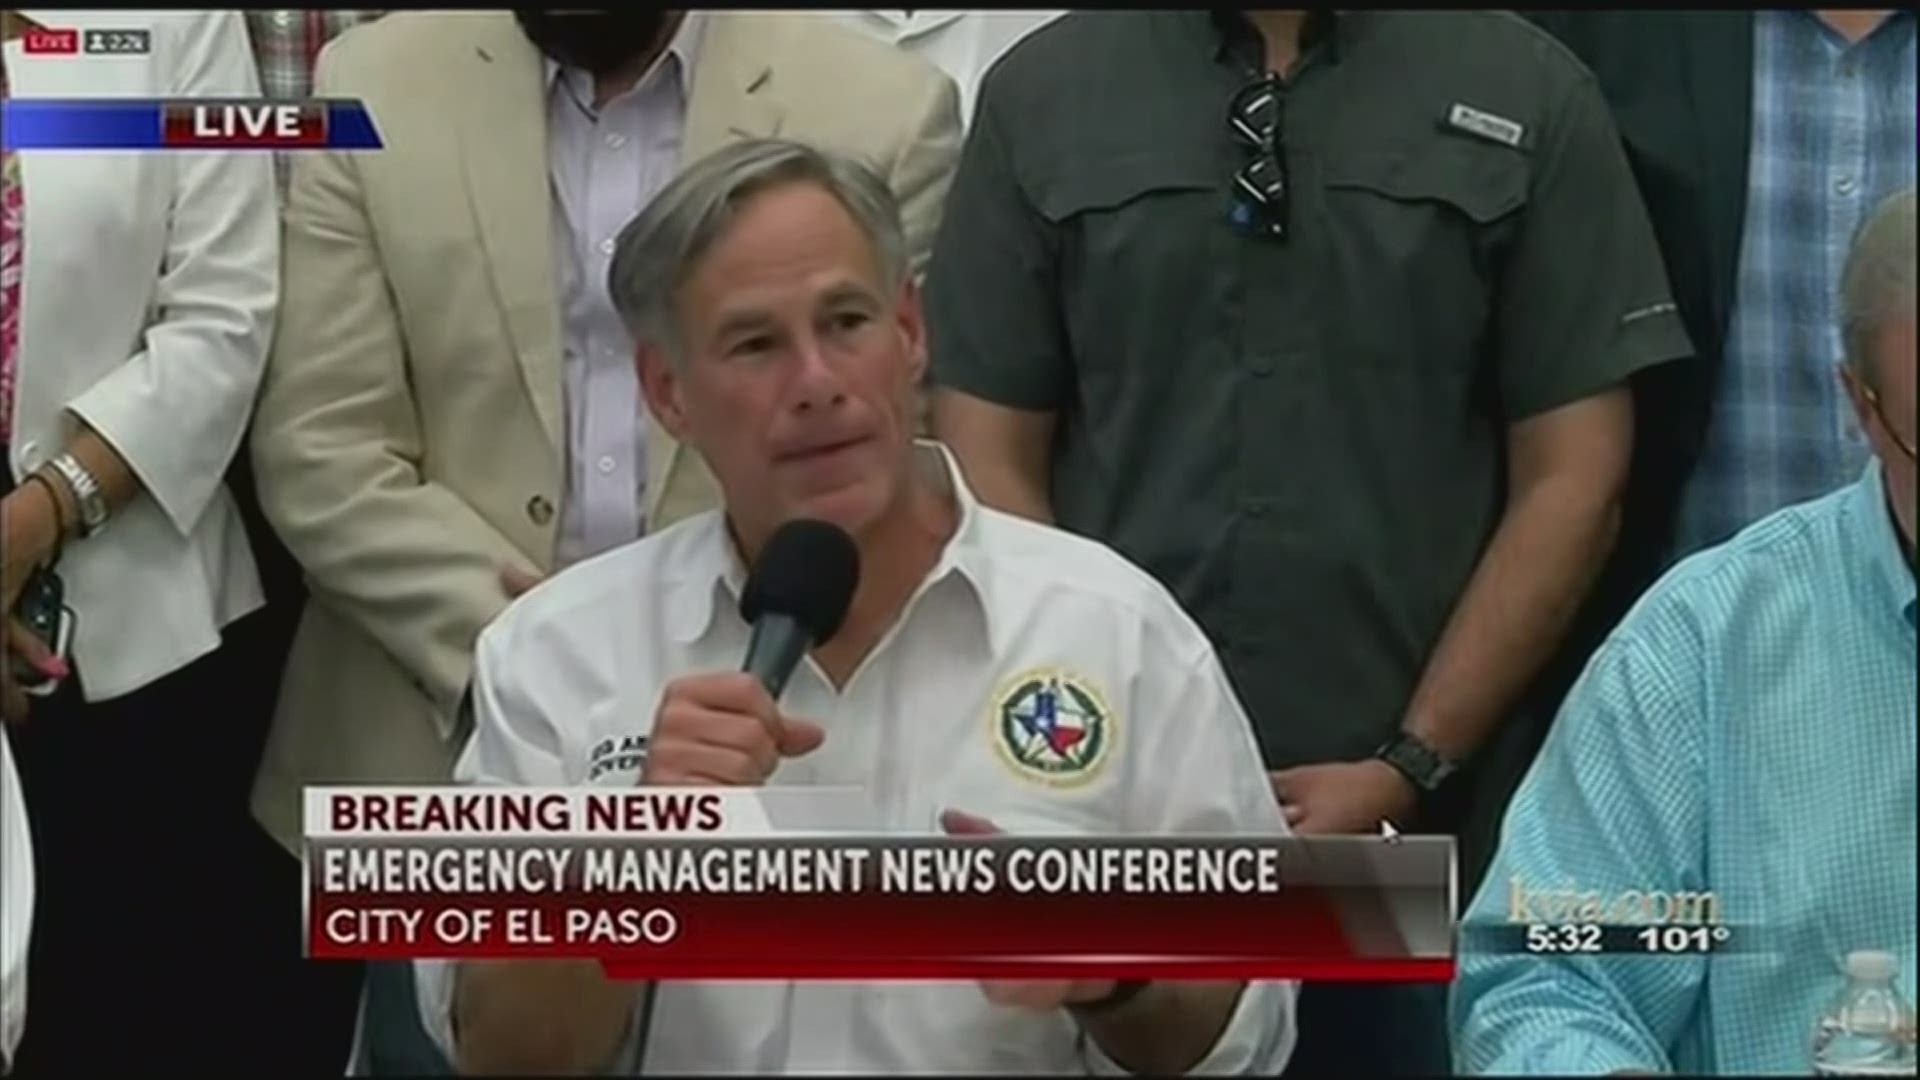 Texas Gov. Greg Abbott and El Paso Police Chief Greg Allen said at a news conference that 20 people were killed in a shooting at a mall, and 26 were injured. (KVIA via AP)